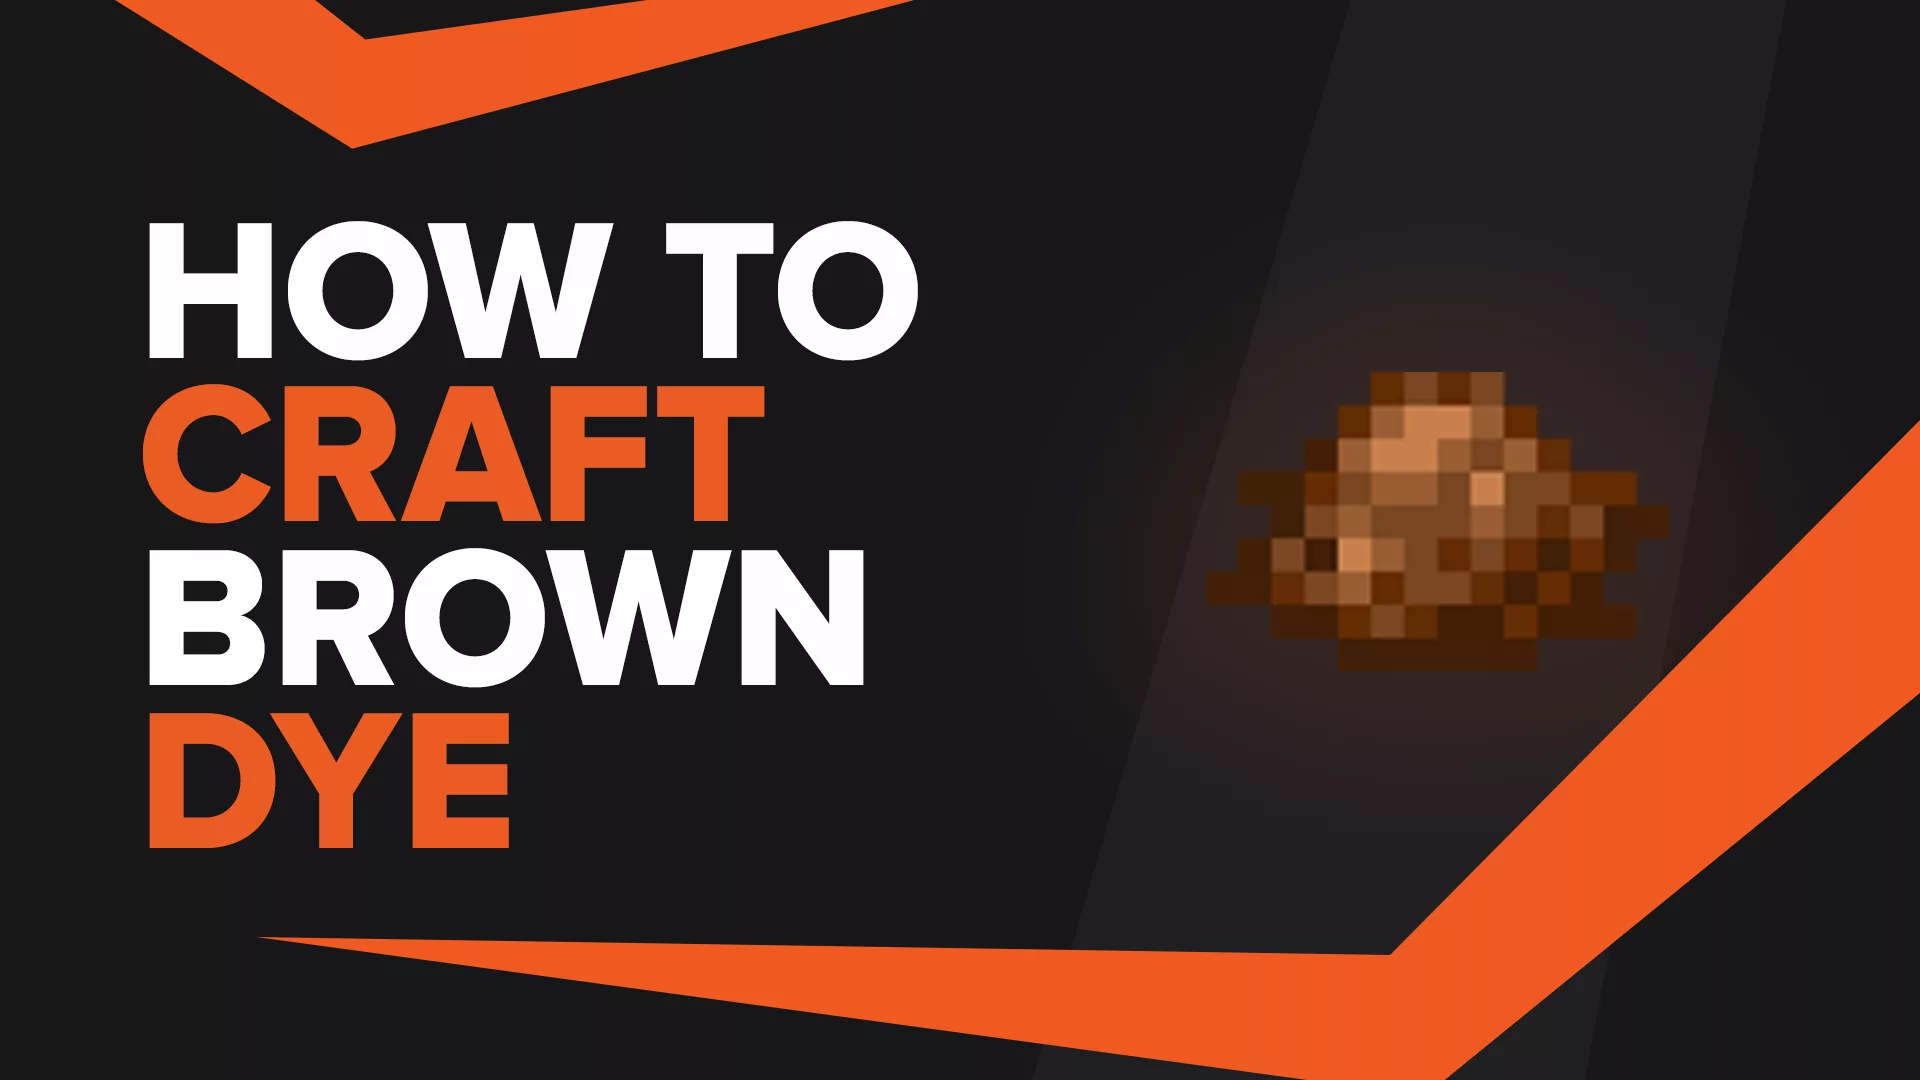 How To Make Brown Dye In Minecraft